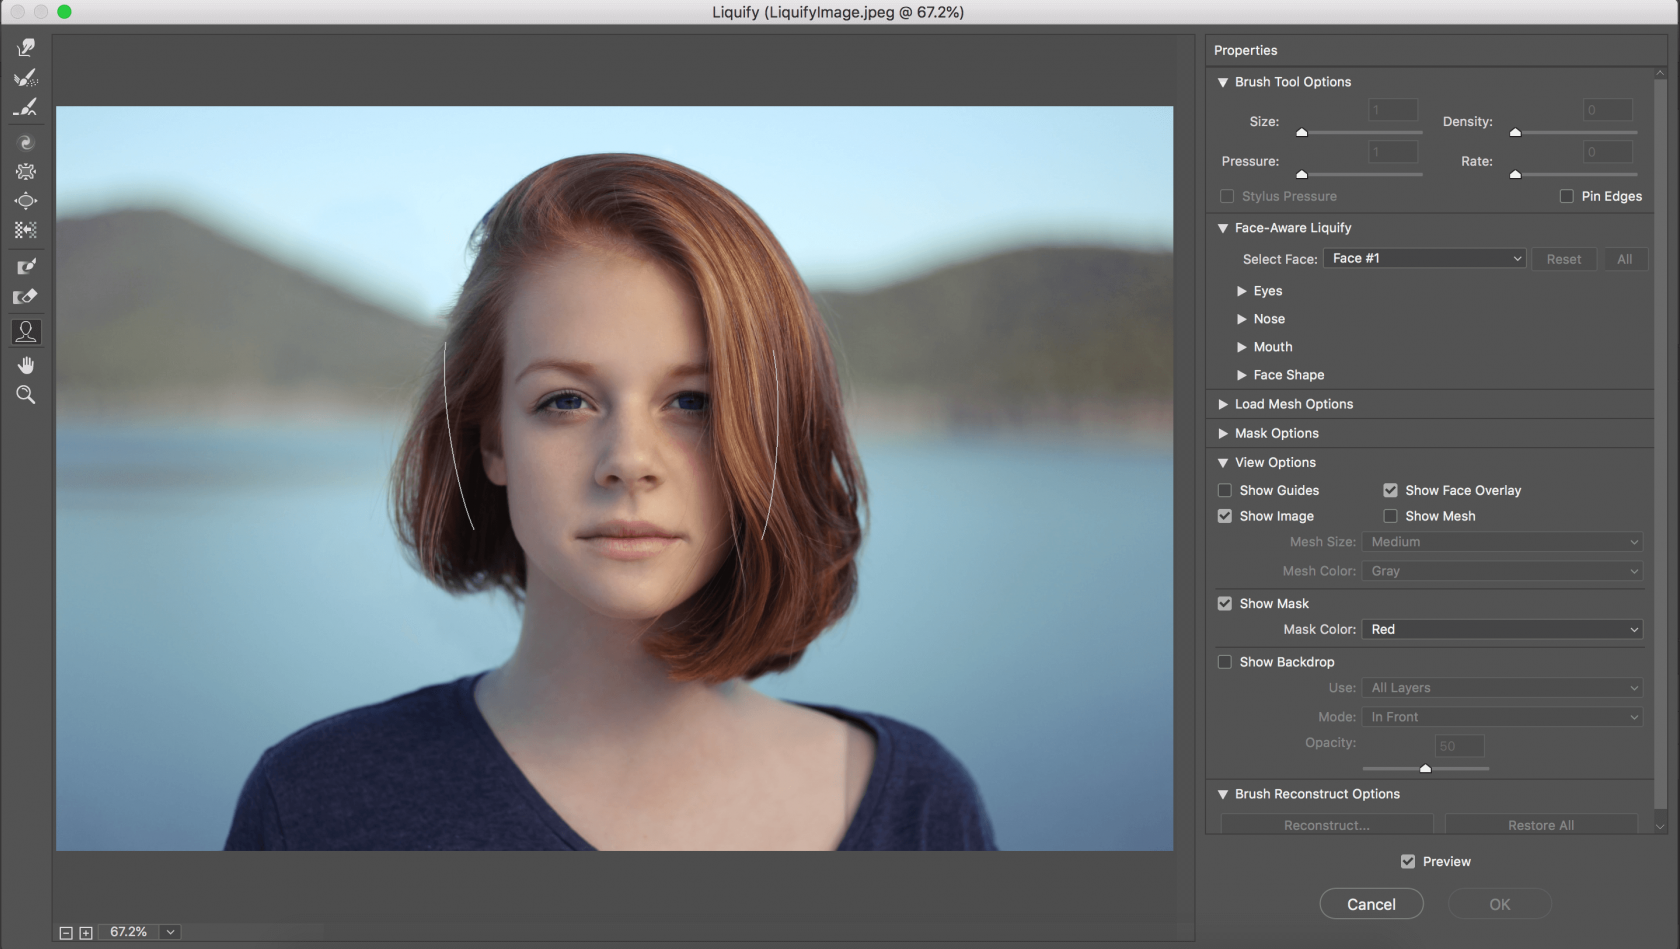 How to Use the Liquify Tool in Photoshop: Mastering the Basics Image11